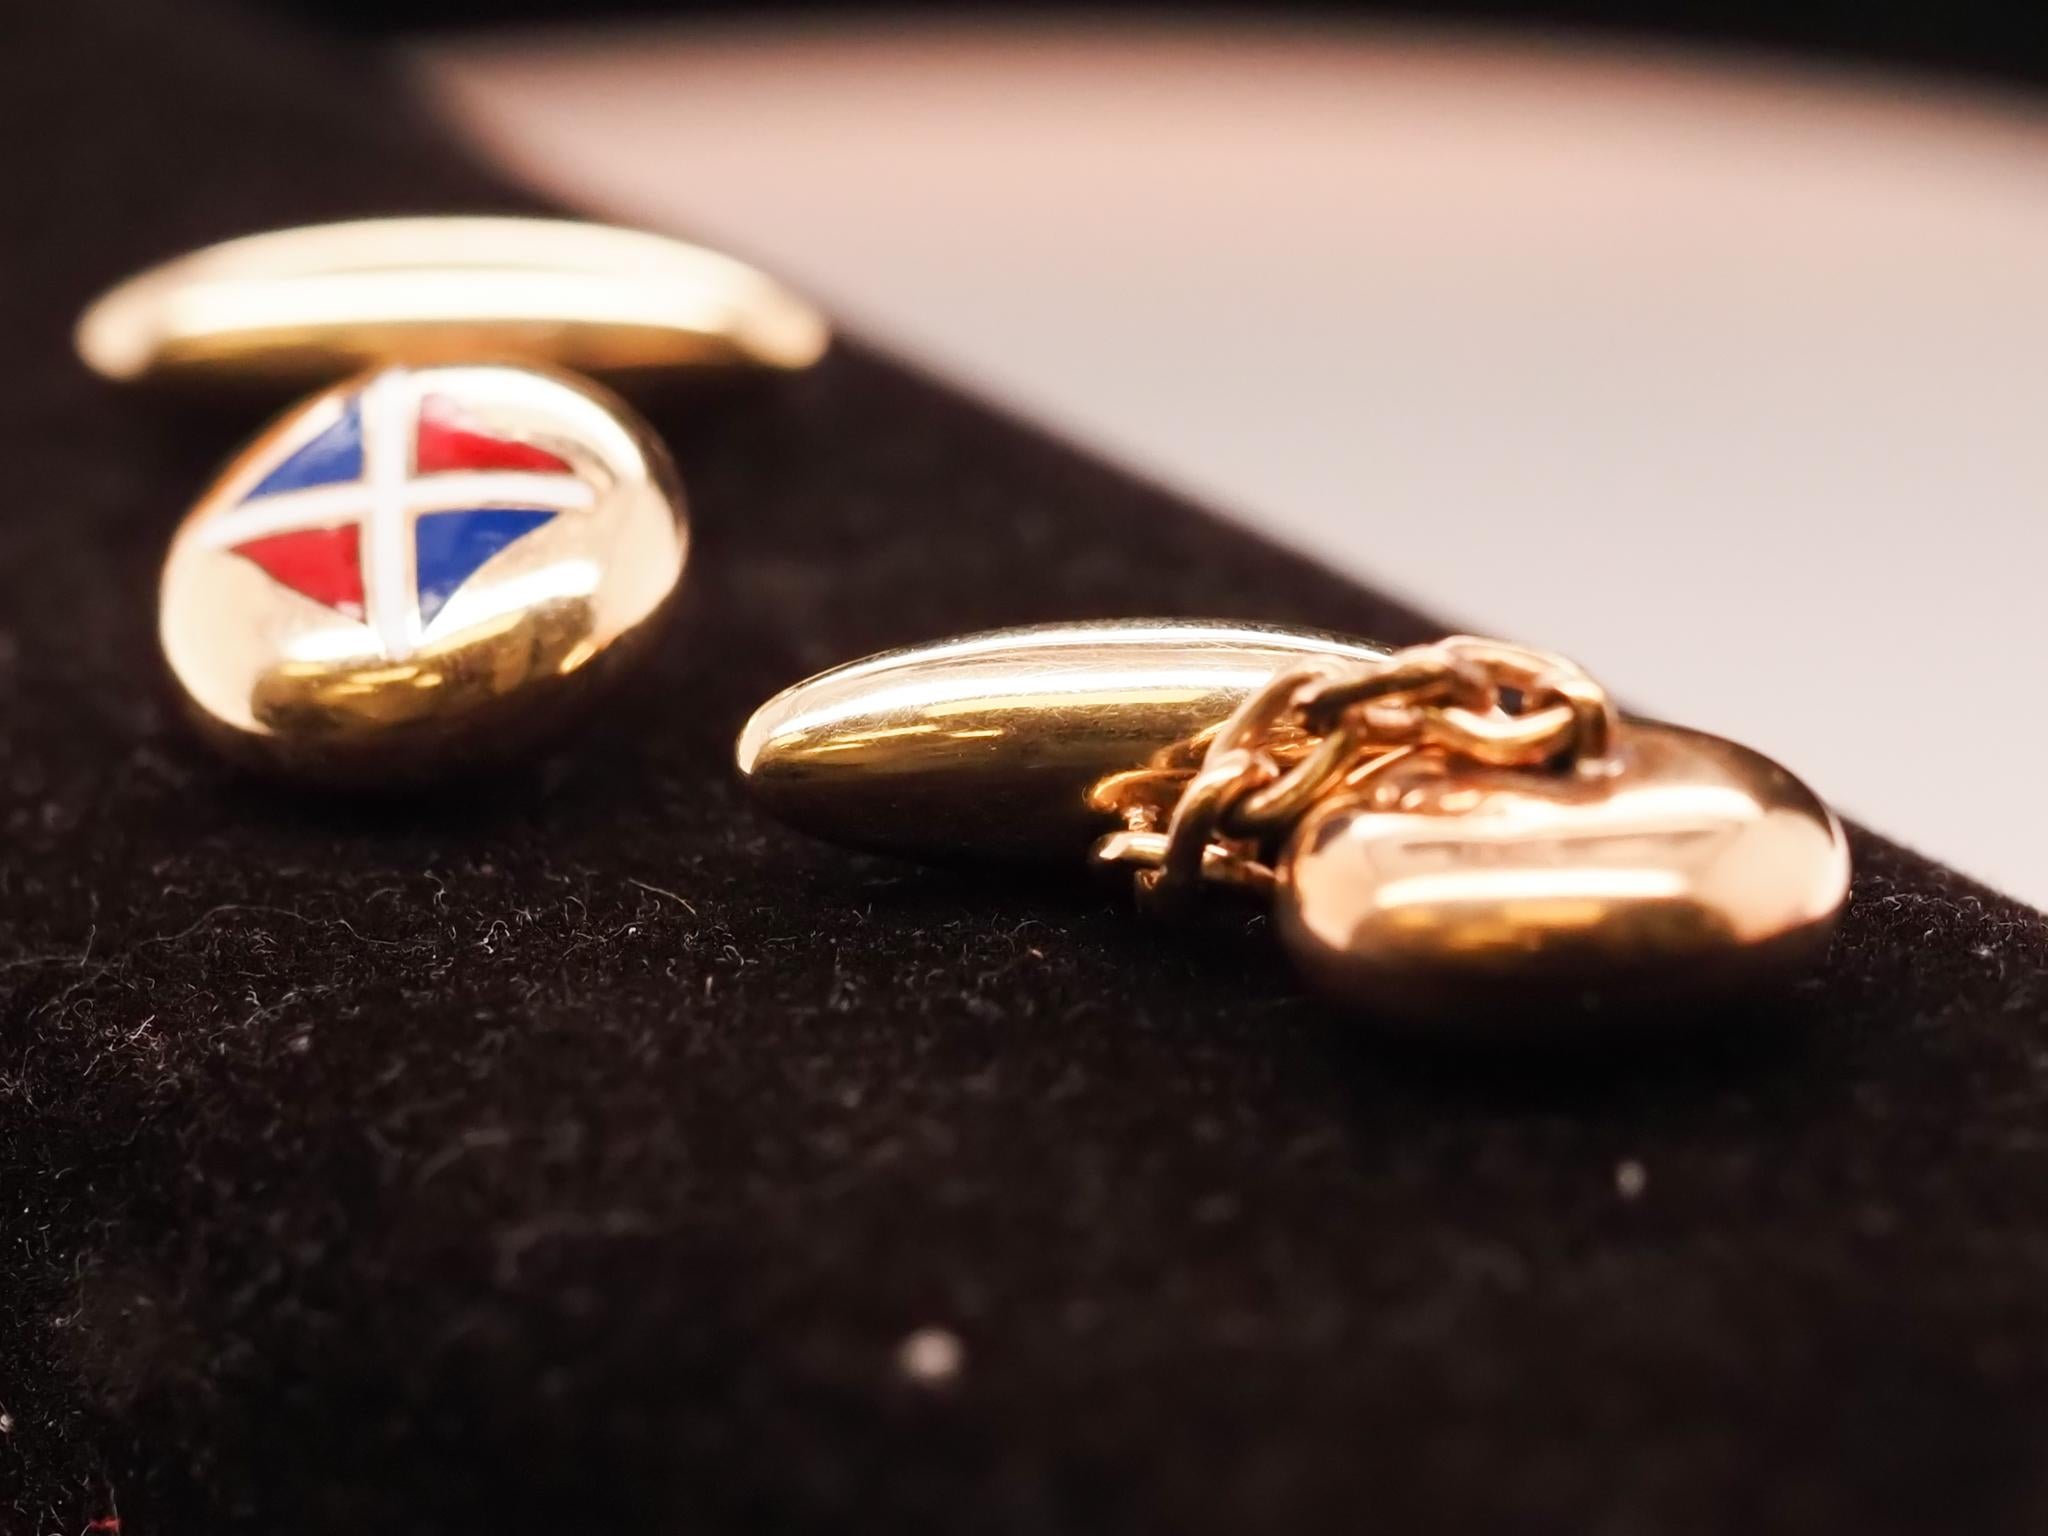 1940s Tiffany & Co 14K Yellow Gold Cufflinks with Enamel Flag In Good Condition For Sale In Atlanta, GA